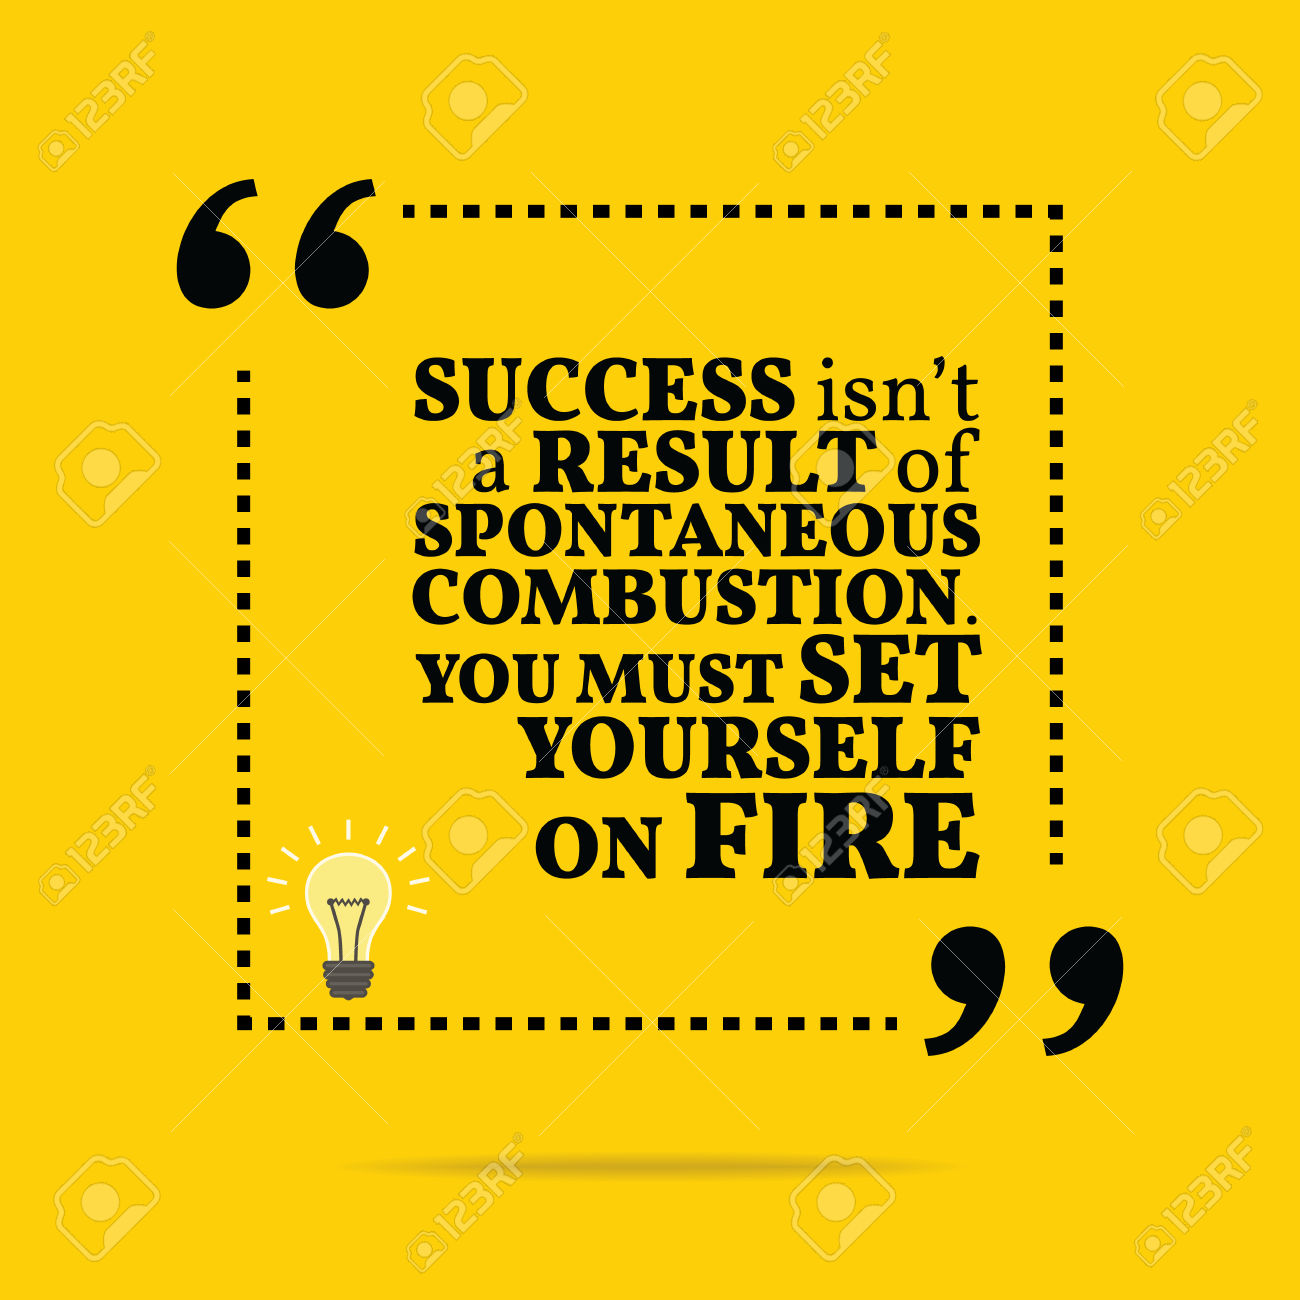 Inspirational motivational quote. Success isn't a result of spontaneous combustion. You must set yourself on fire. Simple trendy design.